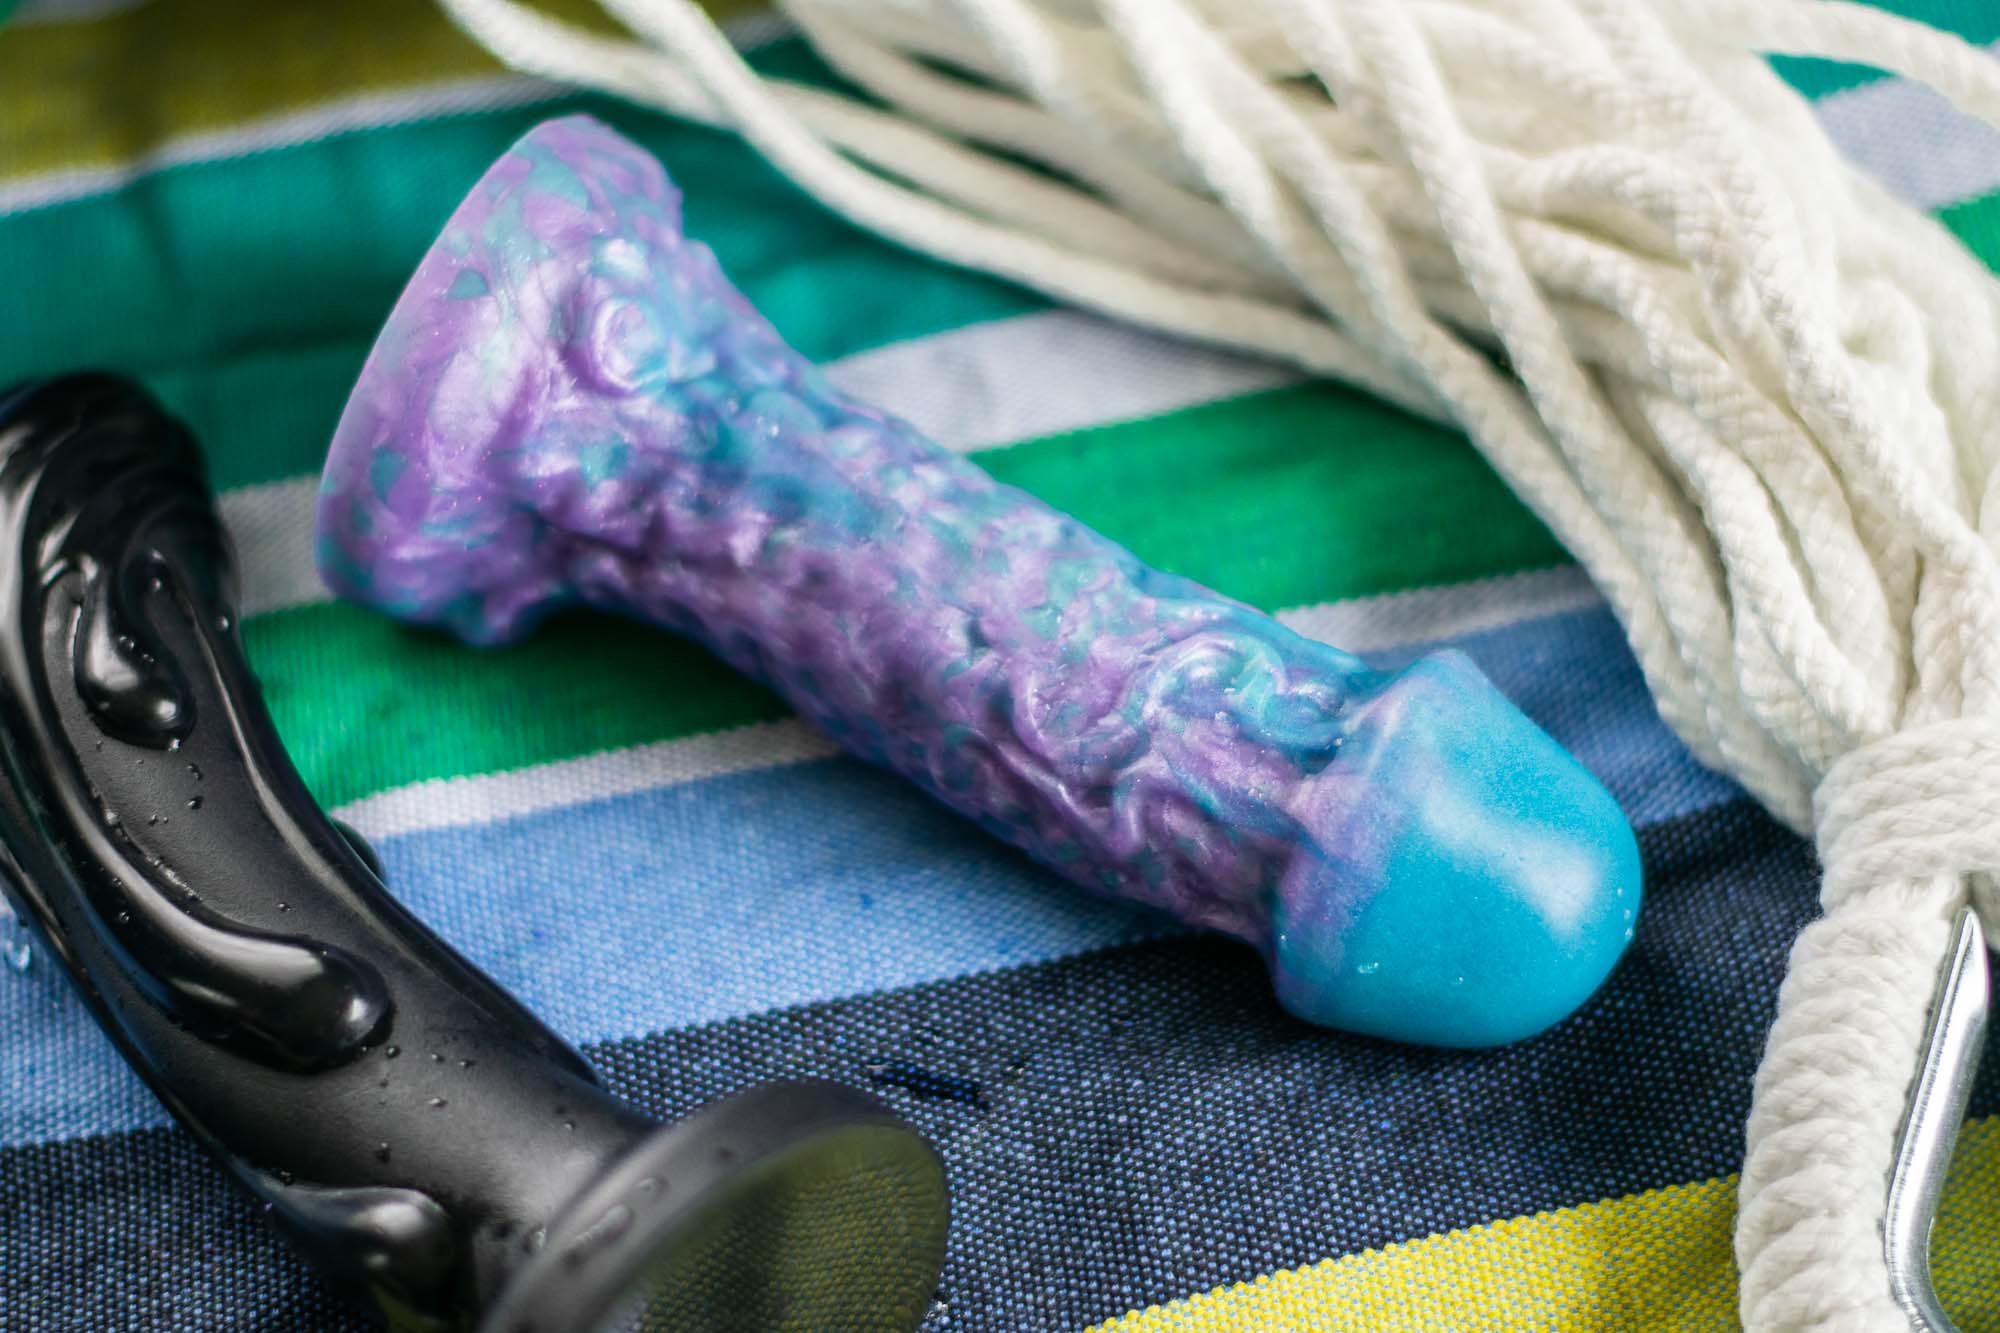 Tantus Magma (left) and Uberrime Jellyfish 2.0 silicone dildos lying on colorful striped canvas, next to some rope.